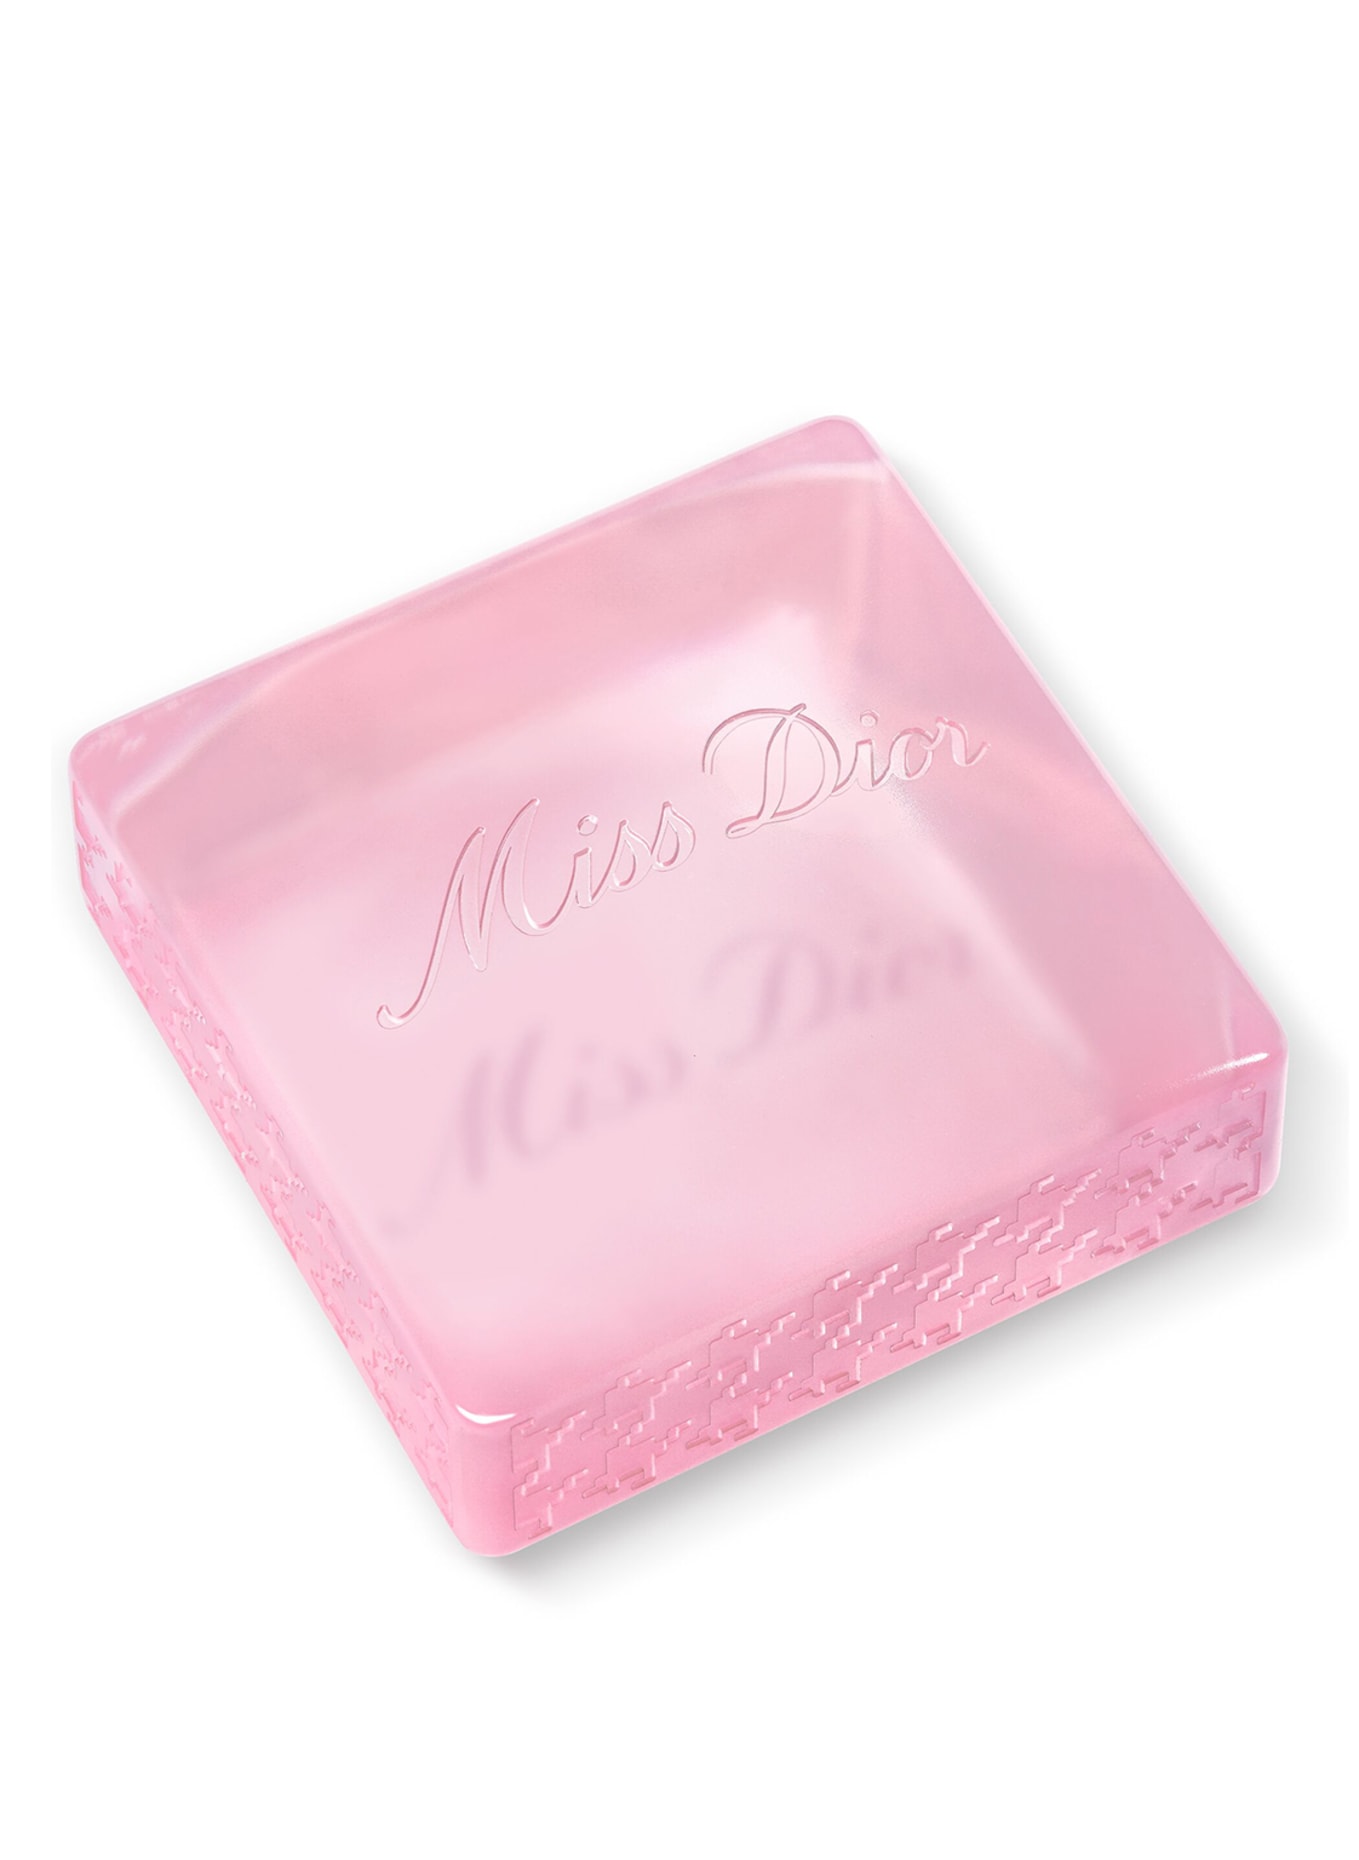 DIOR MISS DIOR BLOOMING SCENTED SOAP (Bild 2)